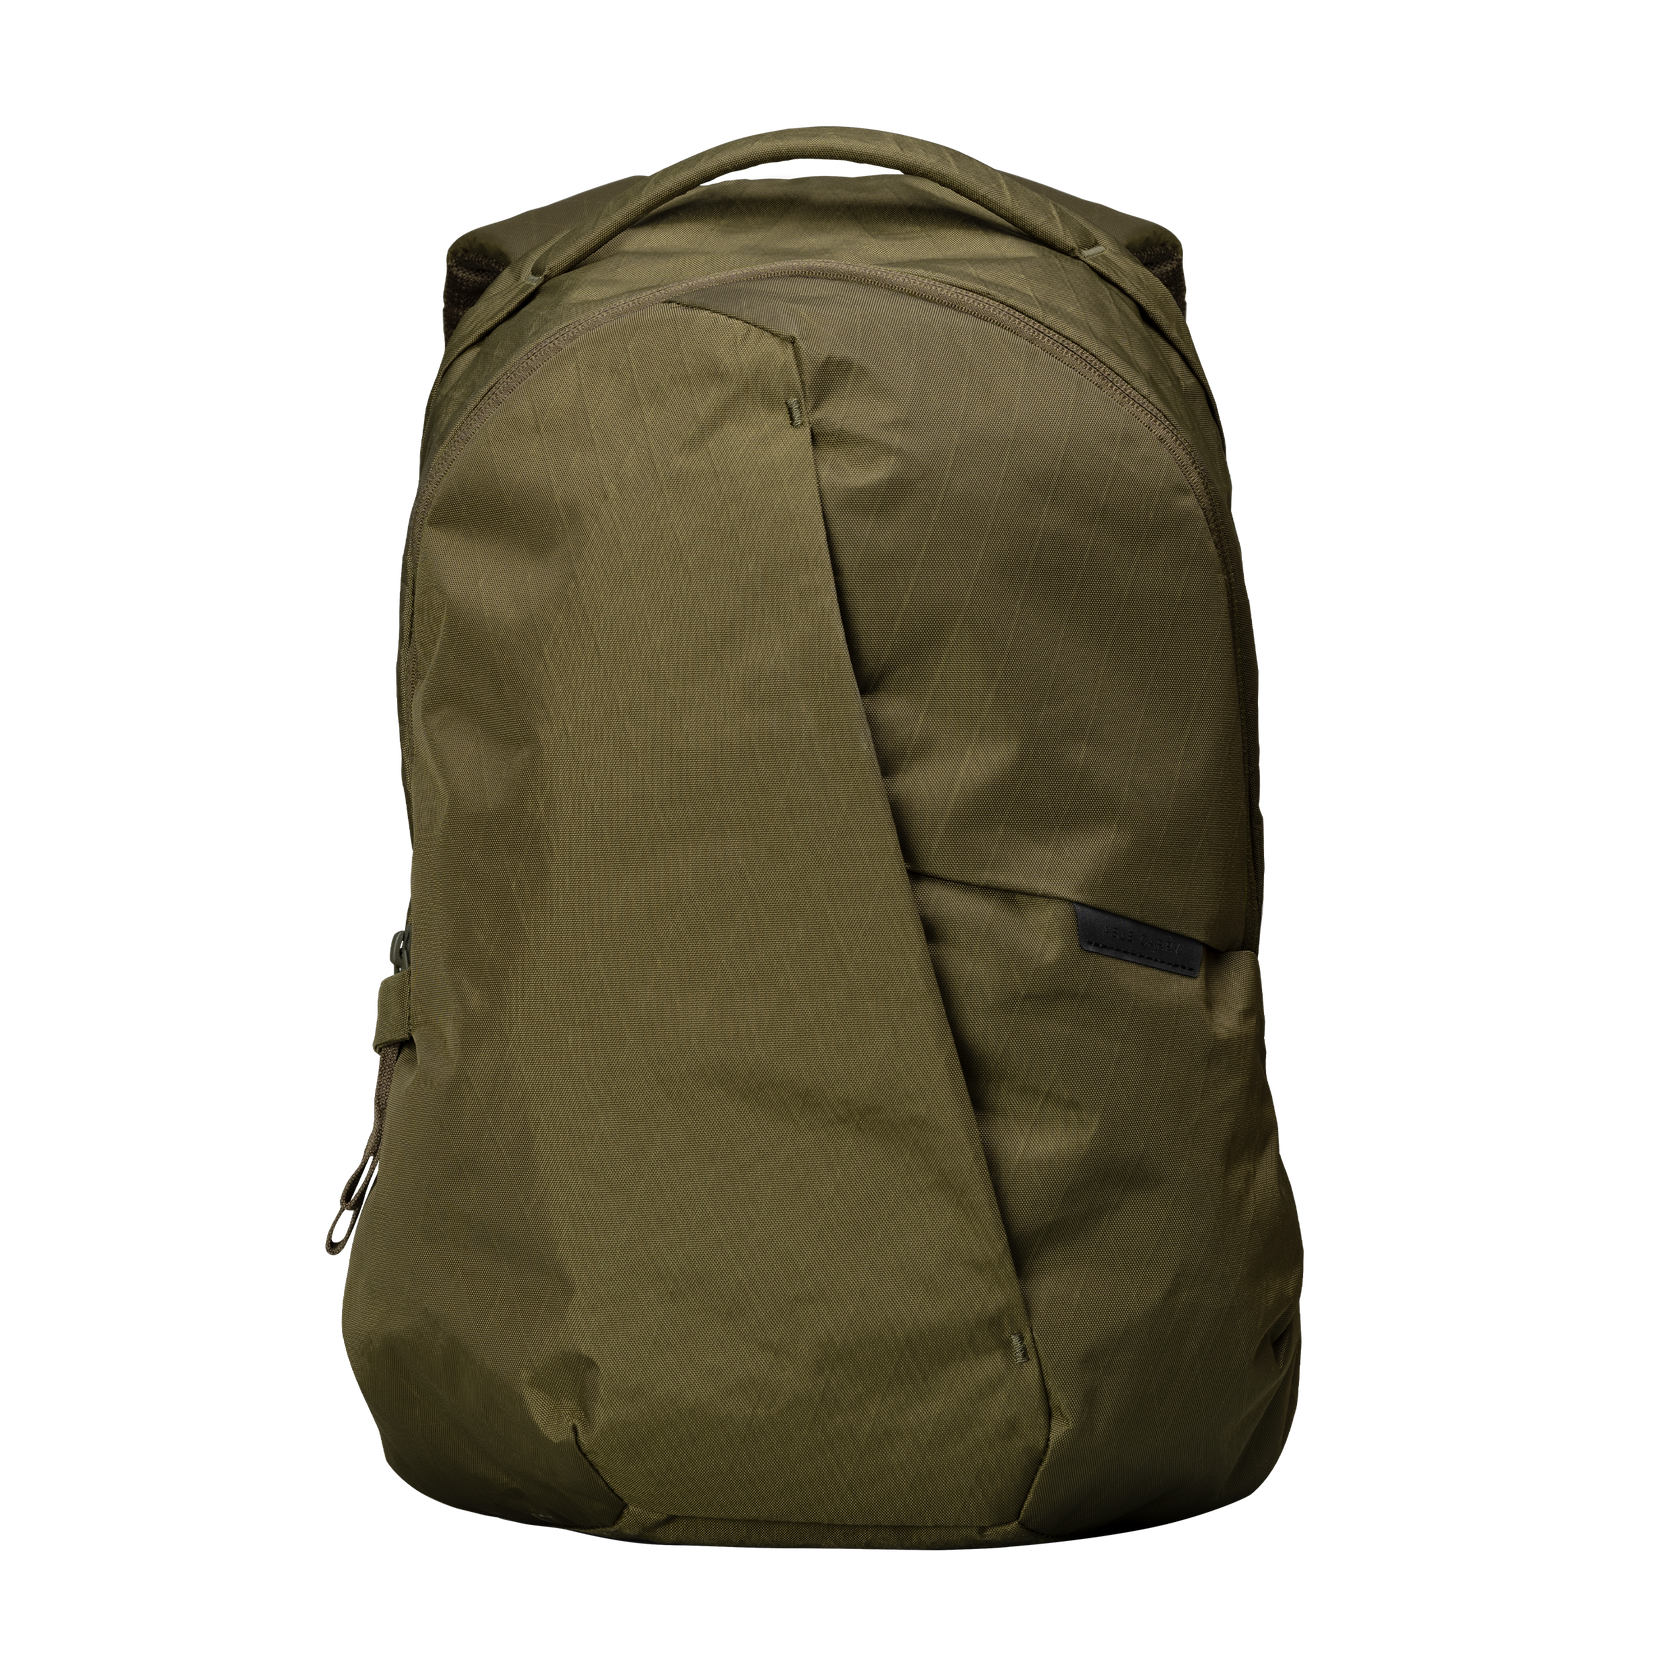 Able Carry Thirteen Daybag